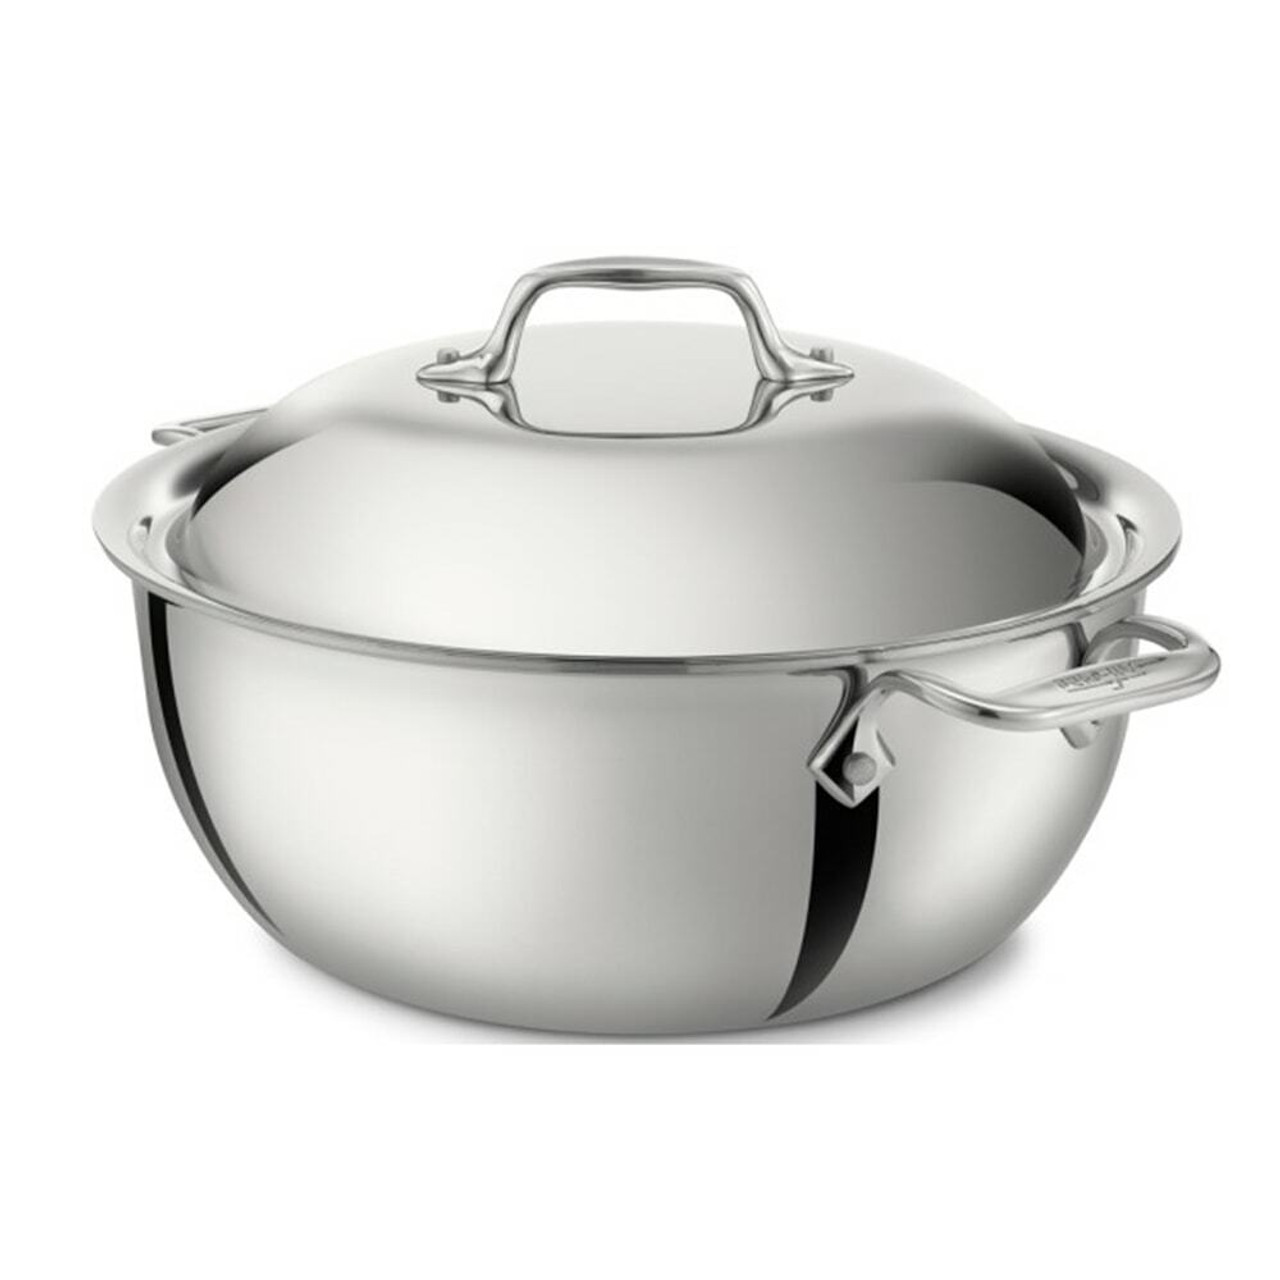 https://cdn11.bigcommerce.com/s-hccytny0od/images/stencil/1280x1280/products/485/16246/all-clad-stainless-steel-dutch-oven__30879.1630672864.jpg?c=2?imbypass=on